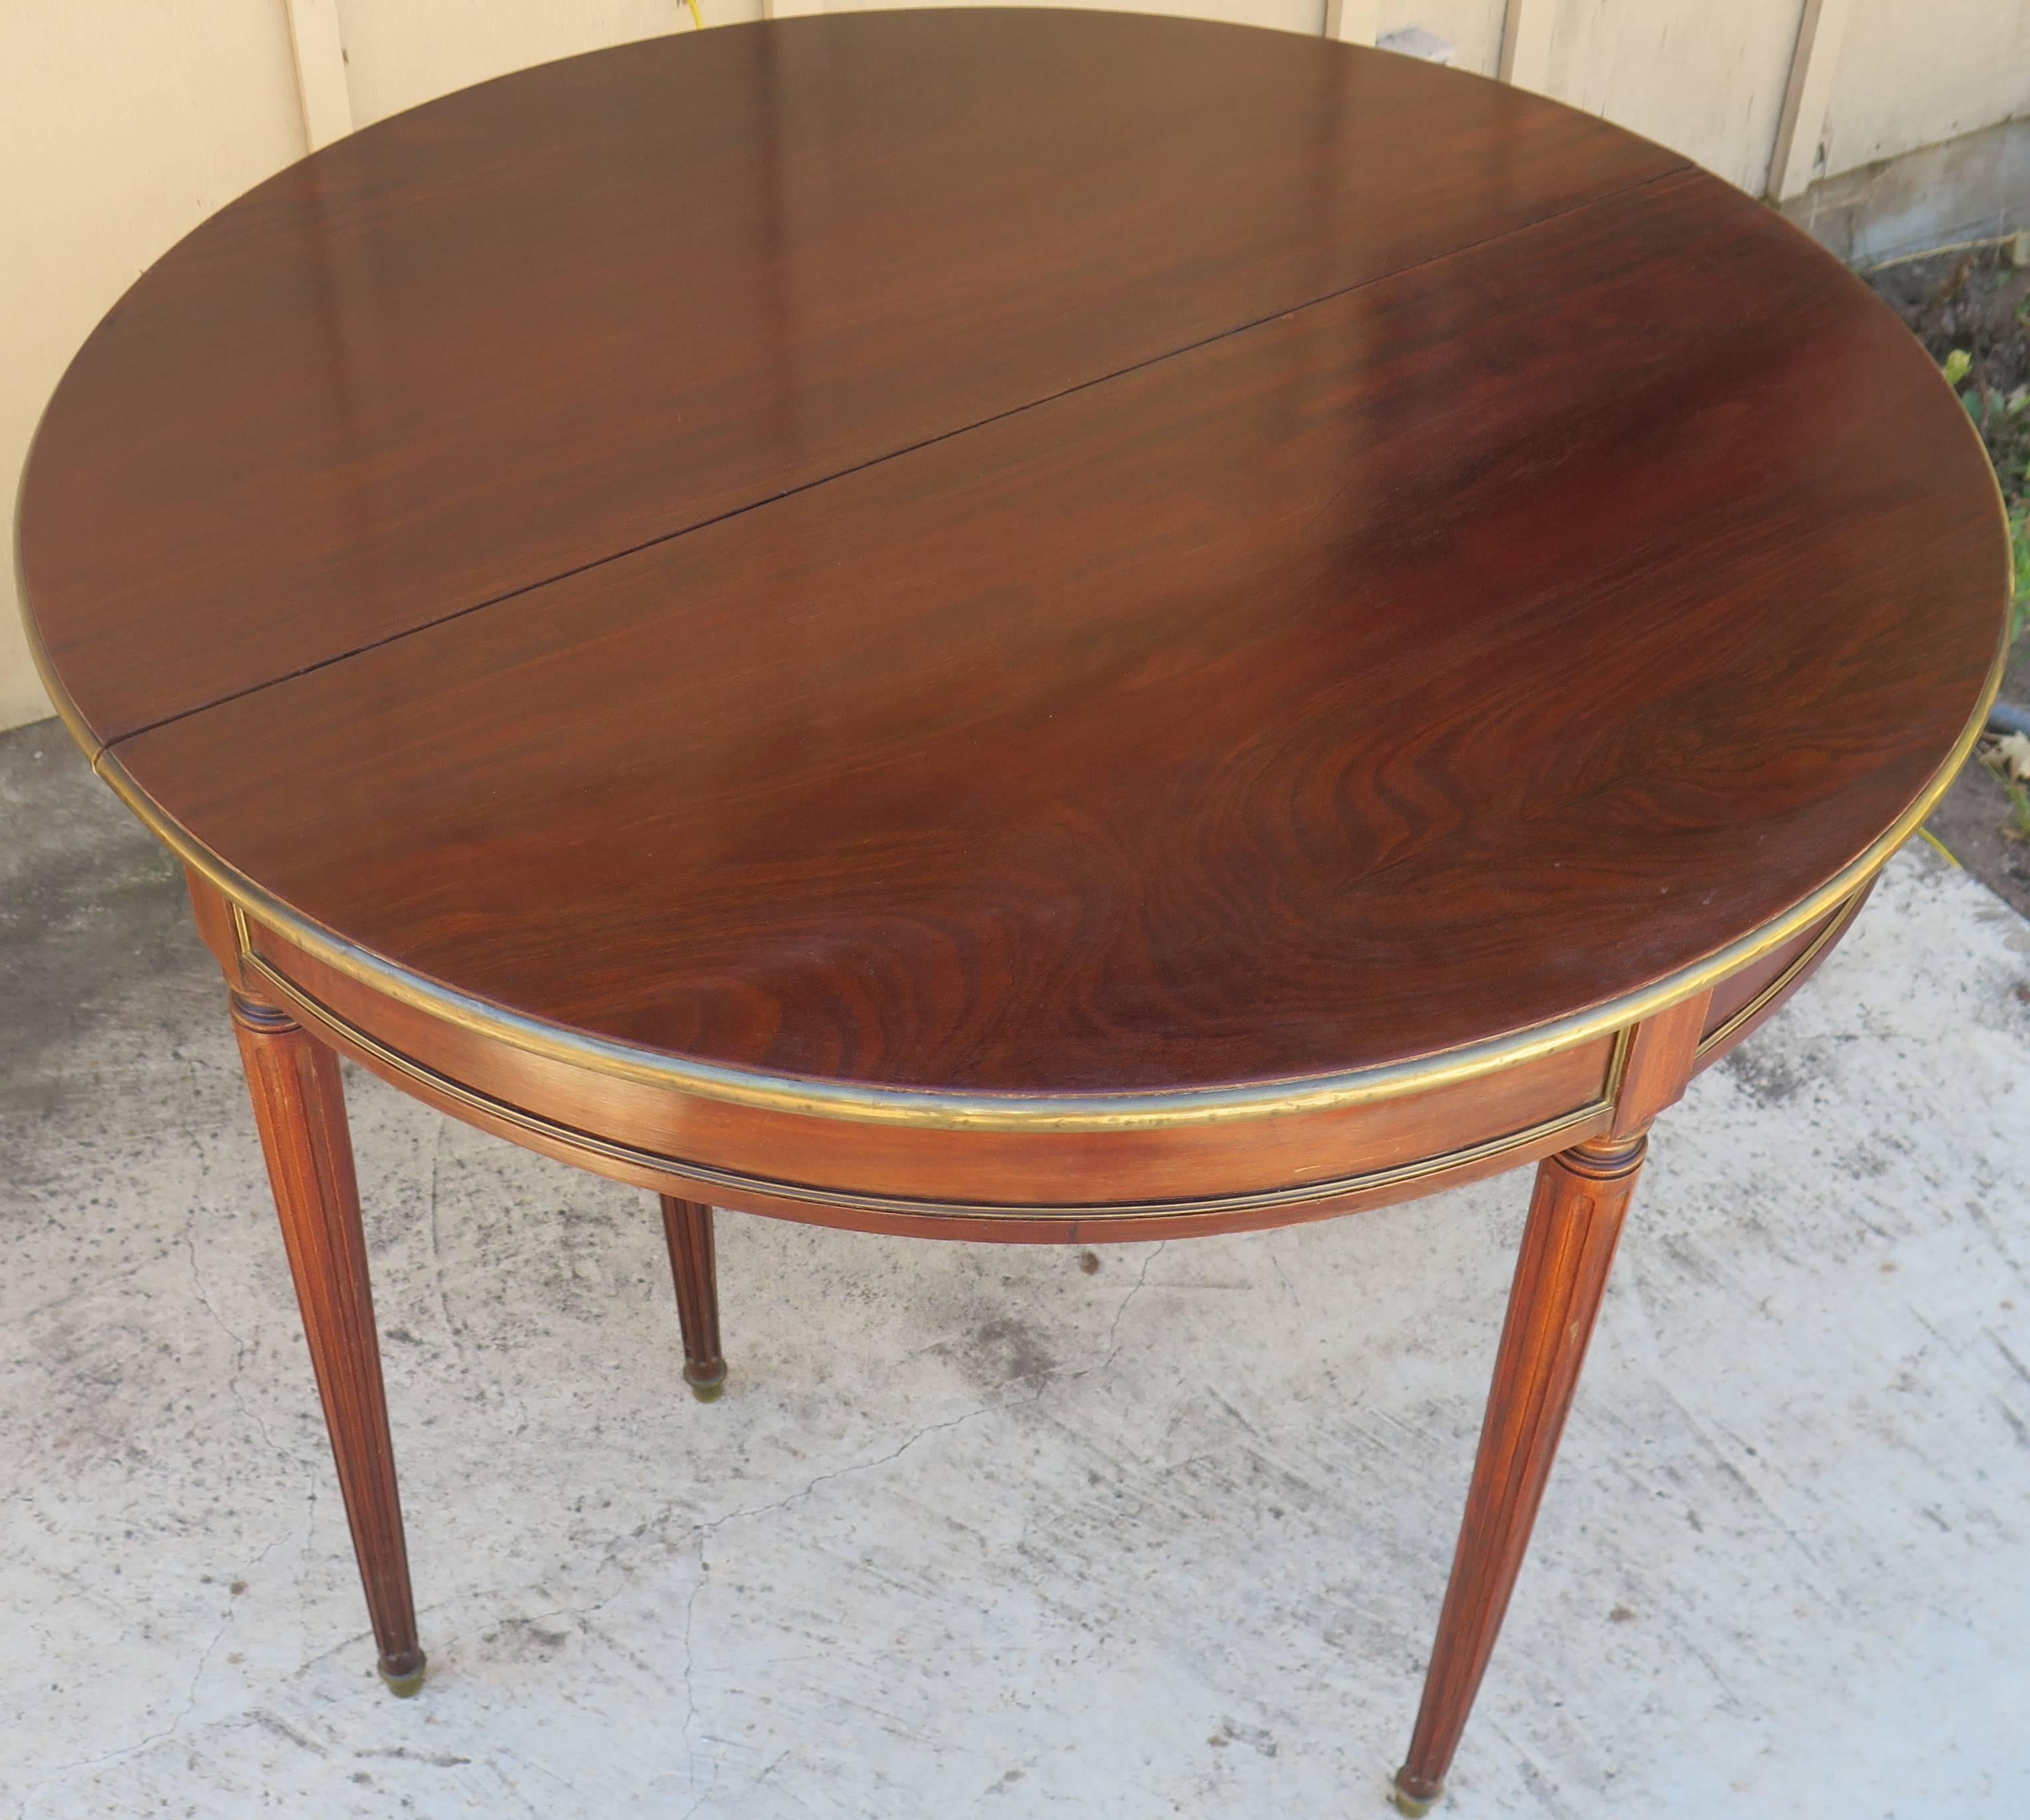 20th Century French Demilune with Bronze Trim Converts to Game Table